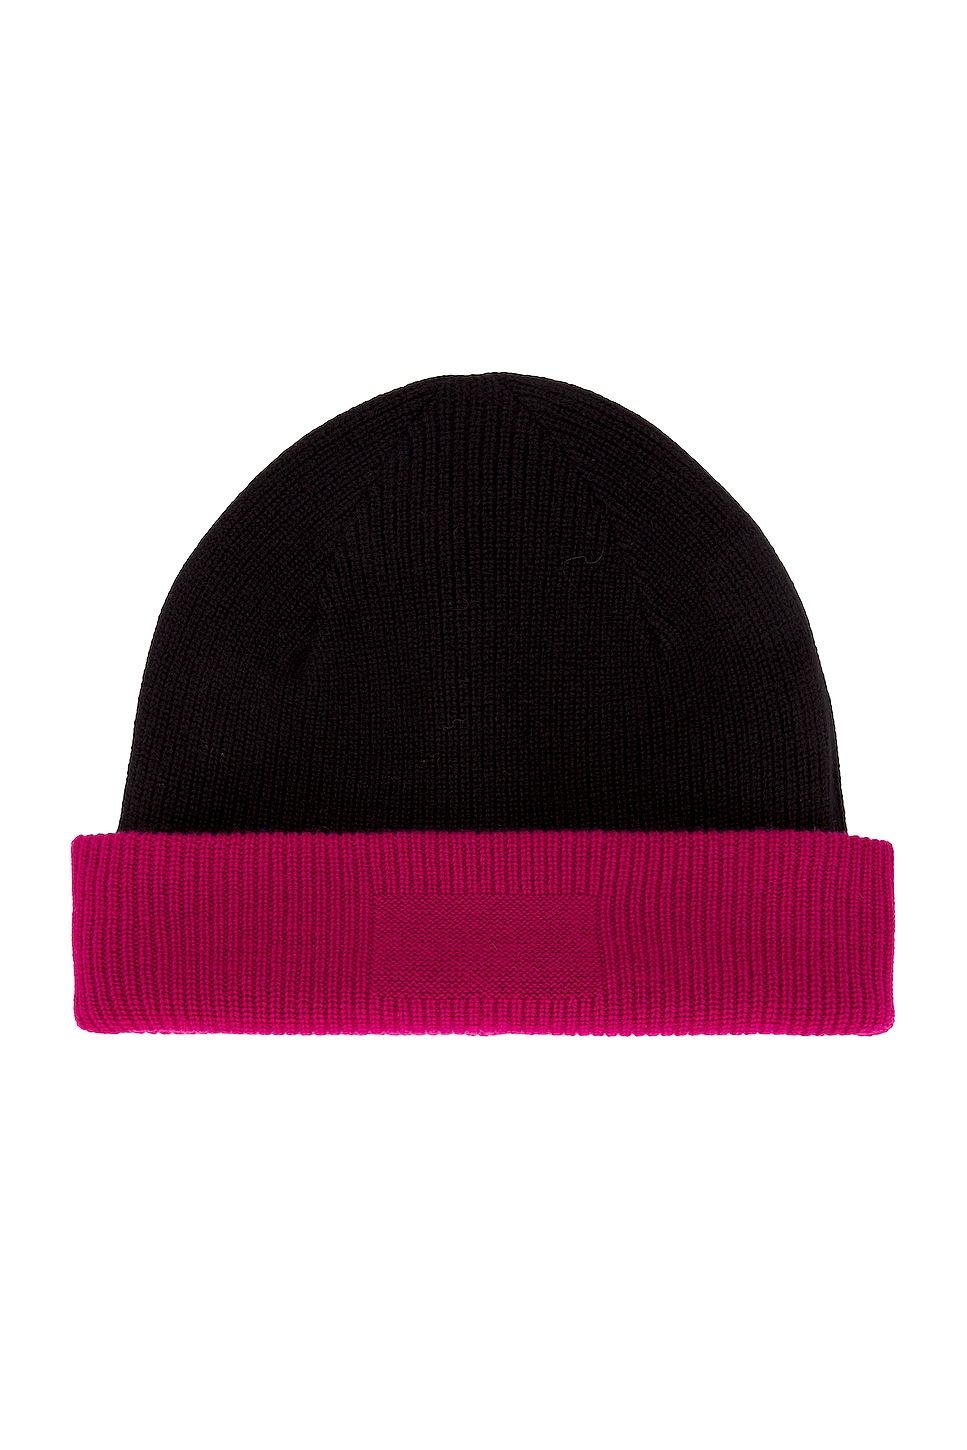 The Inside-Out! Hat in Black,Fuchsia